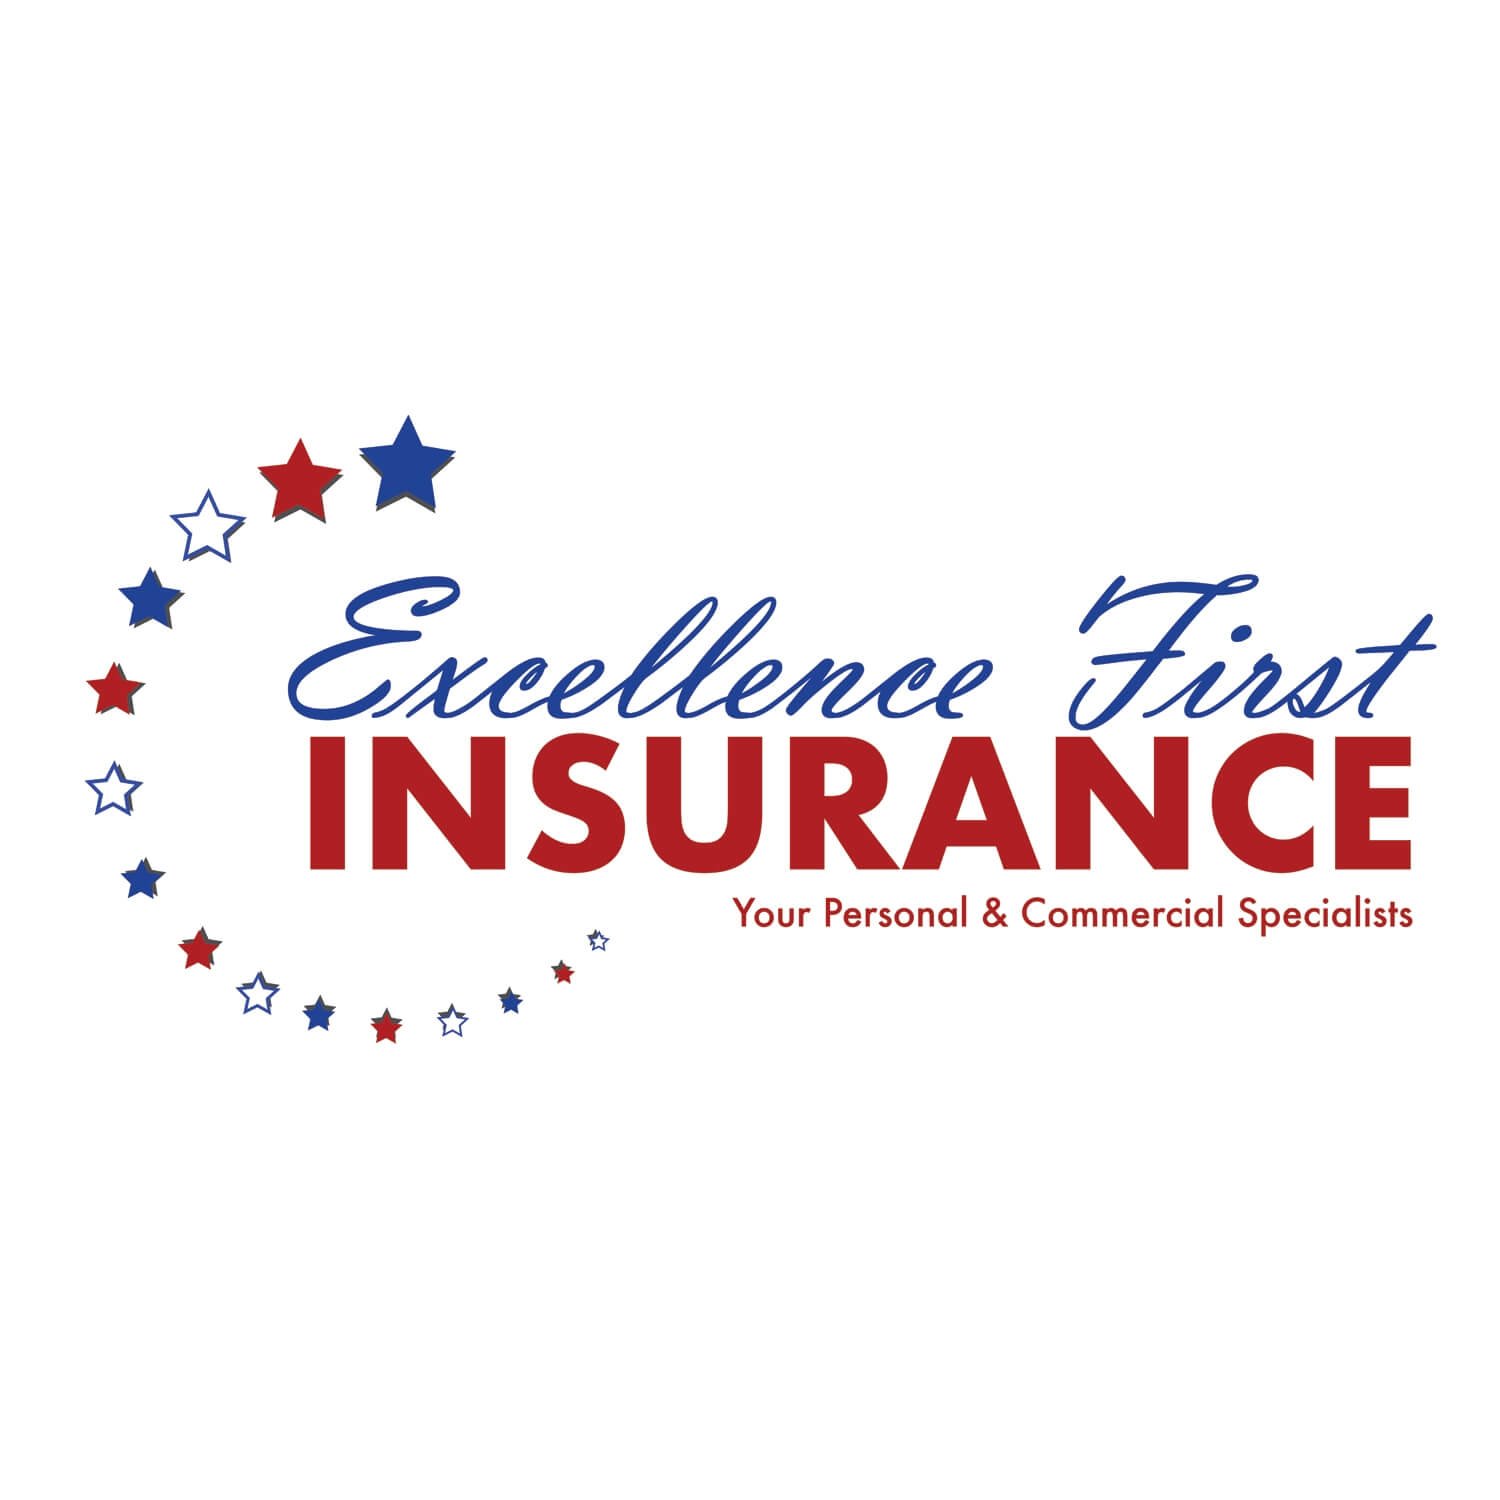 Excellence First Insurance